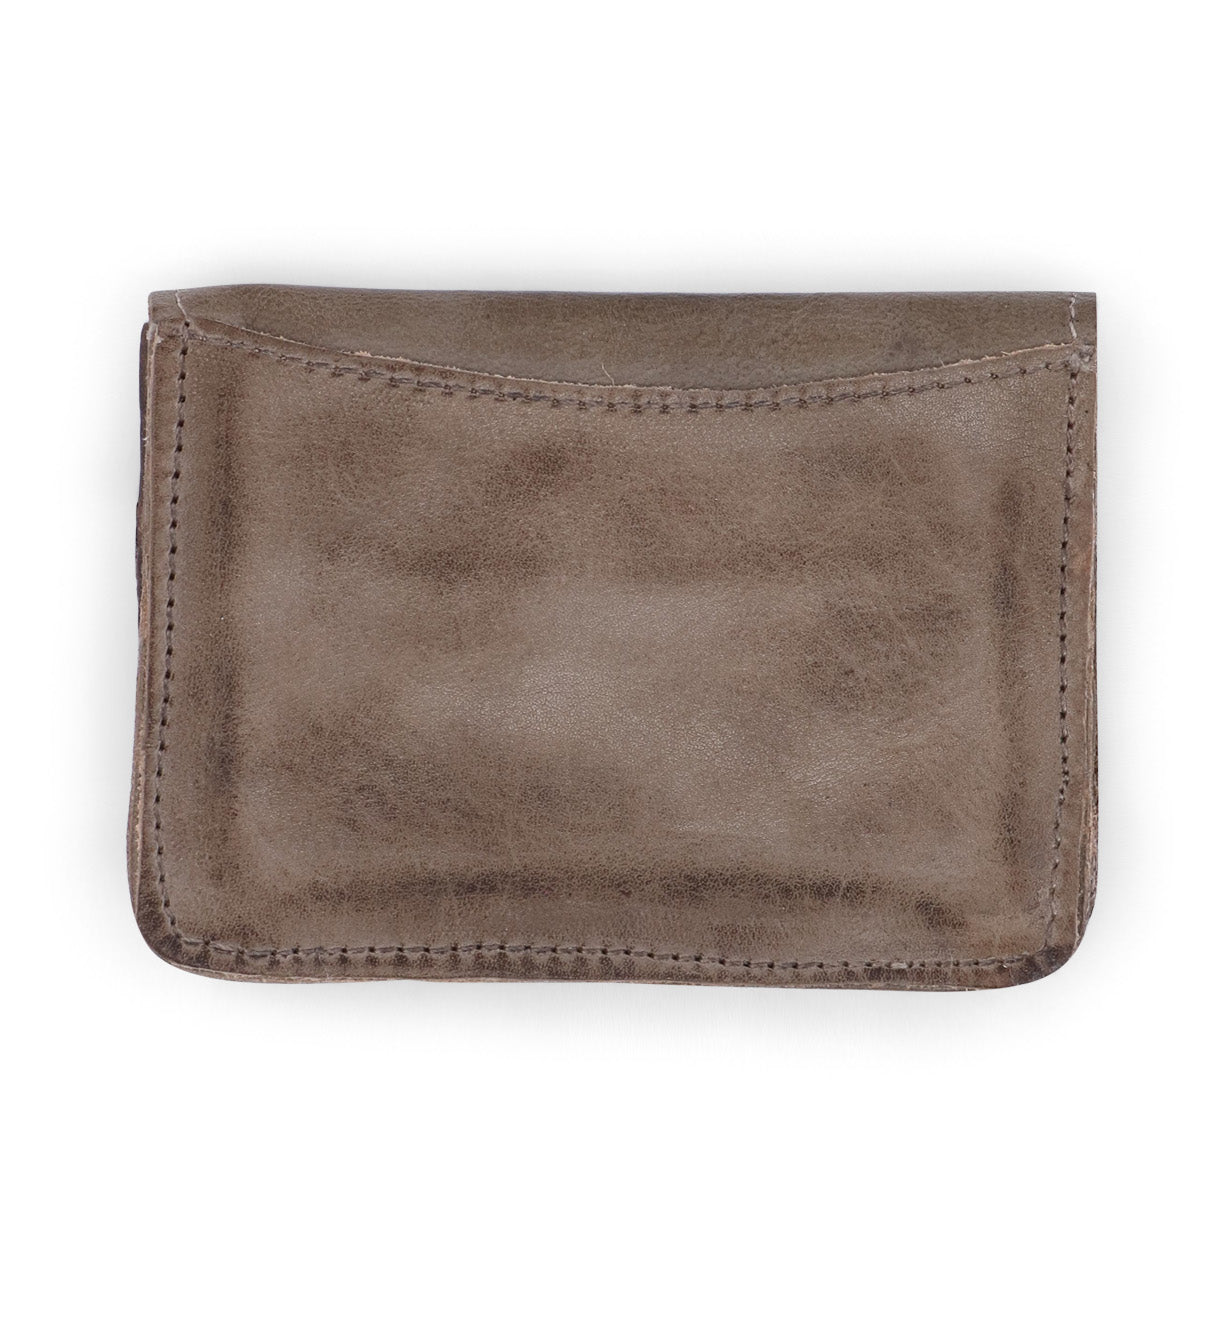 A Jeor by Bed Stu brown leather wallet on a white background.